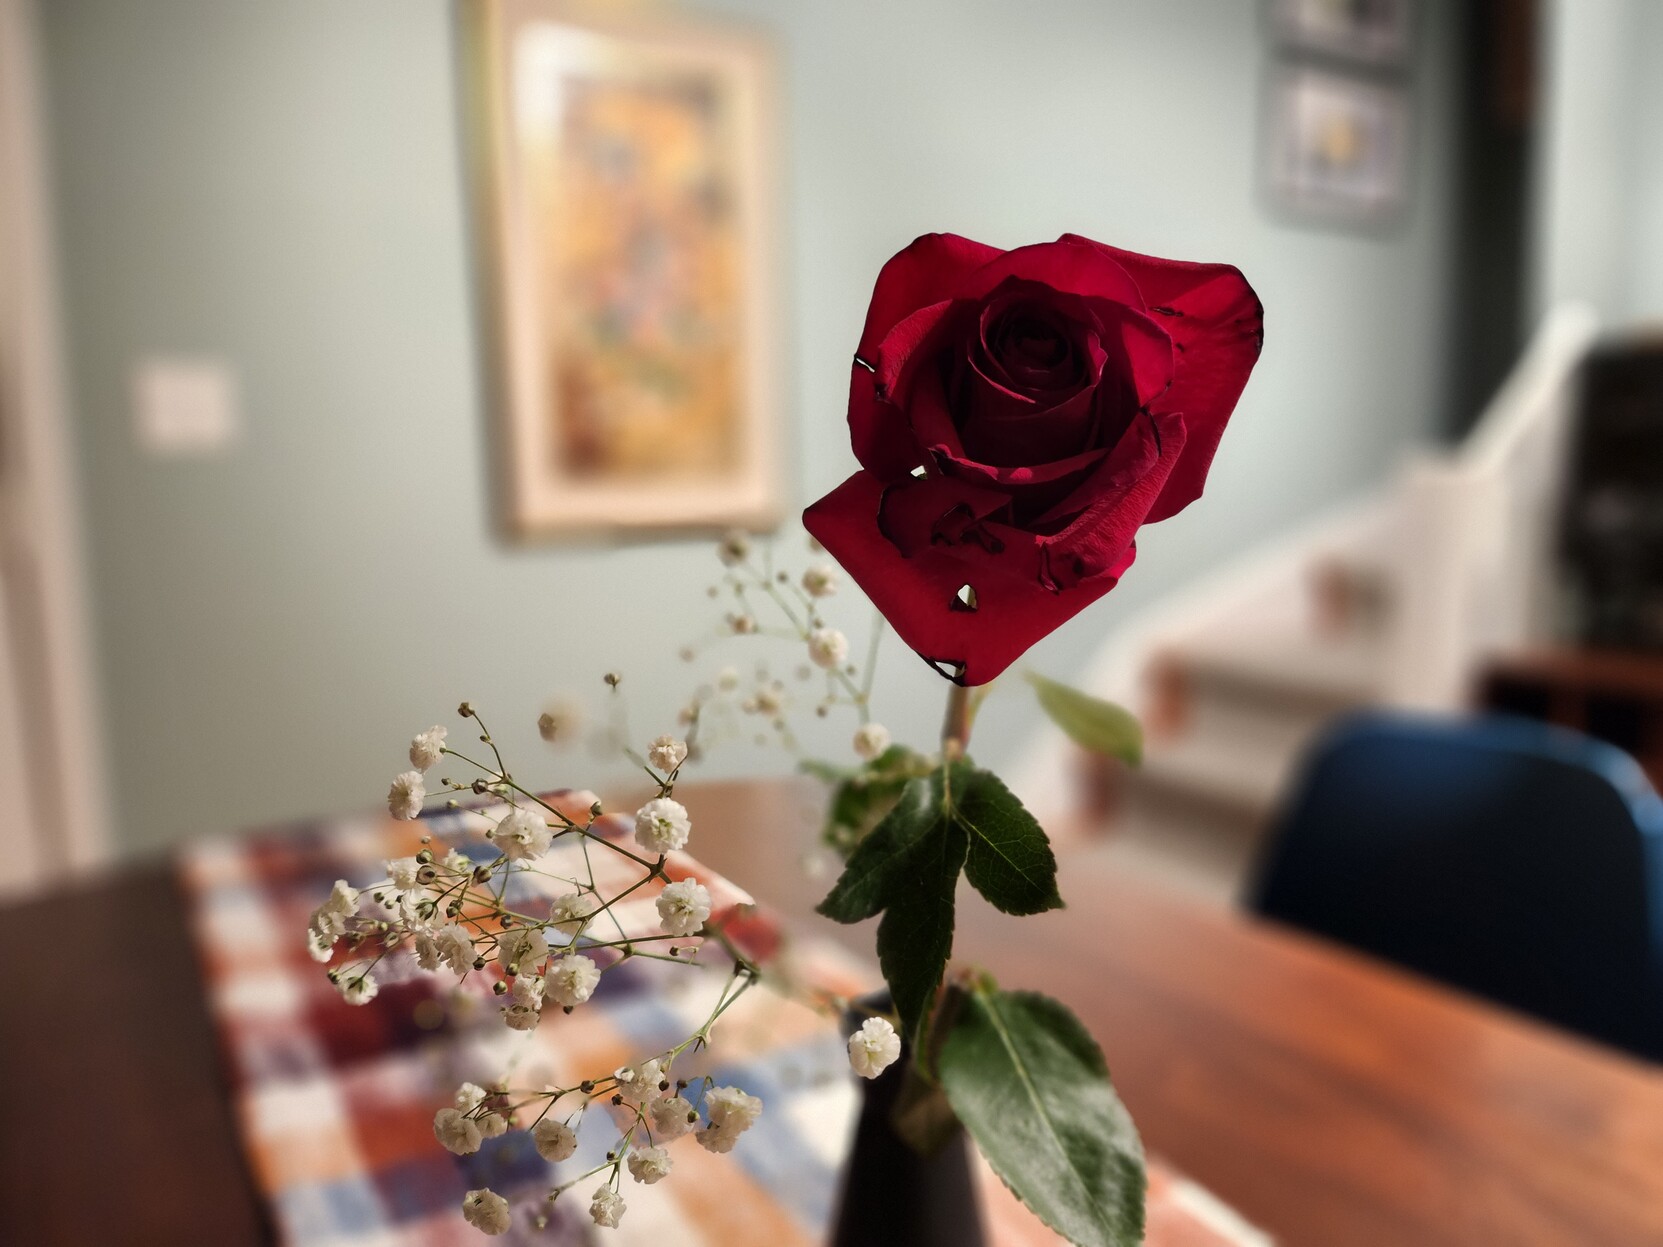 A red rose with baby's breath in a small black vase, with paintings blurred in the background.